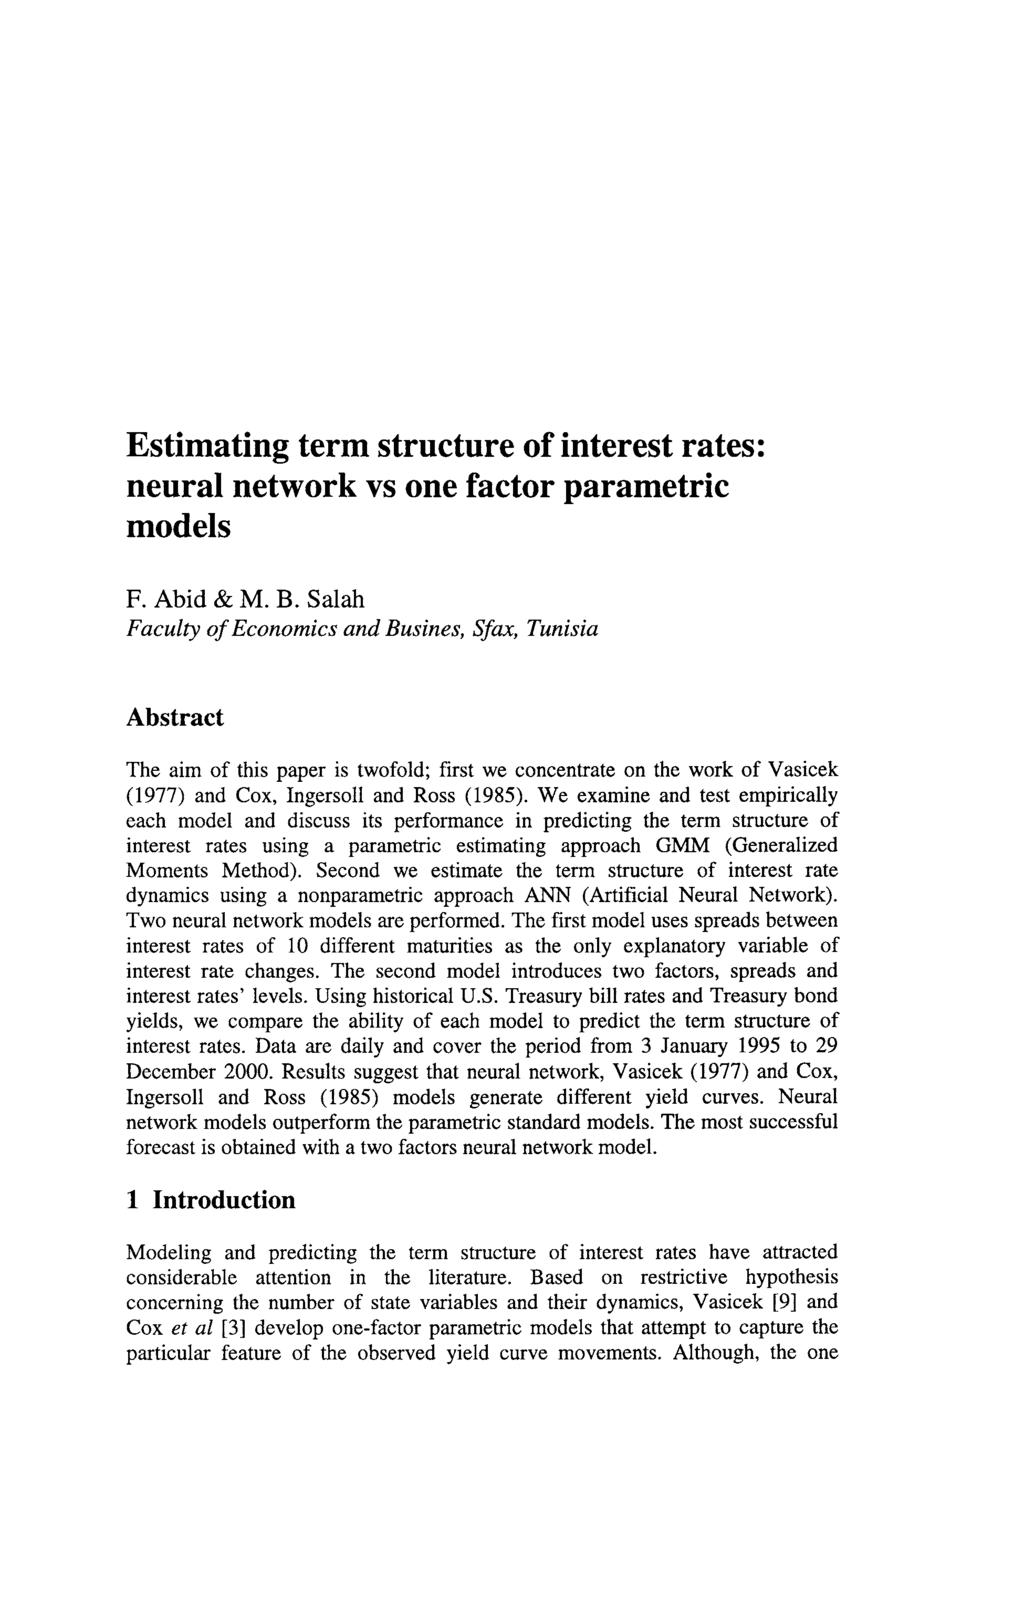 Estimating term structure of interest rates: neural network vs one factor parametric models F. Abid & M. B.